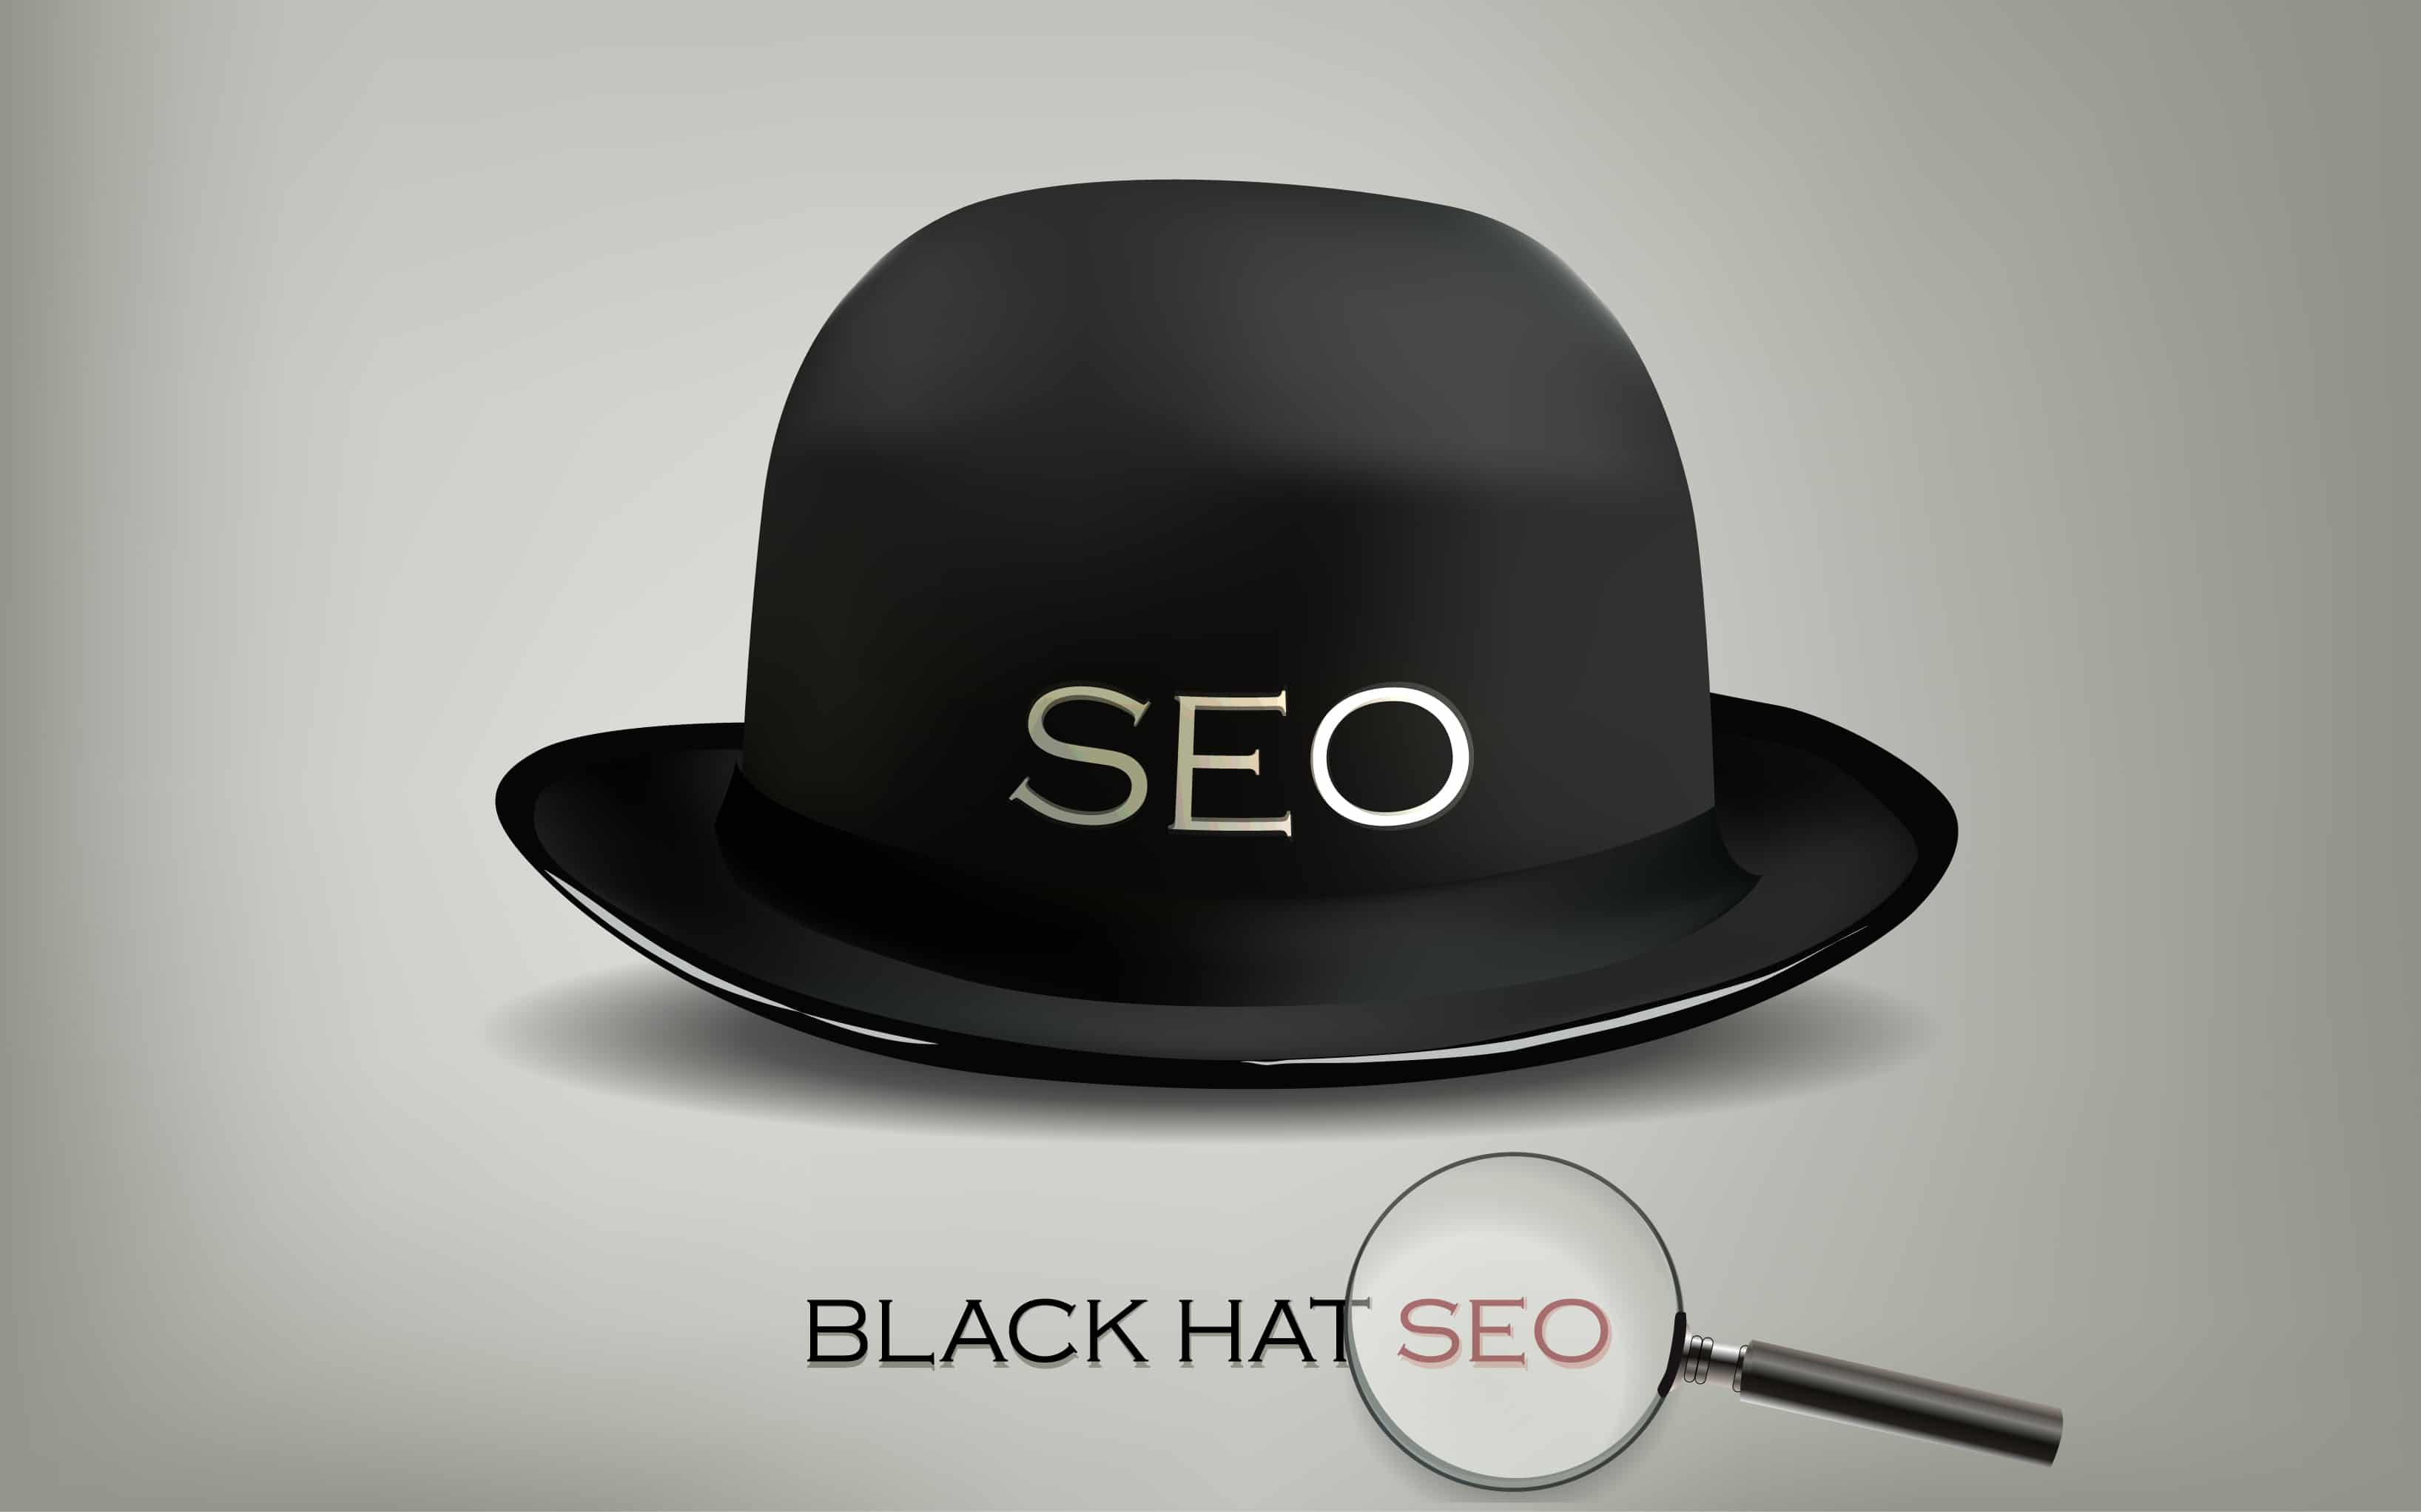 A black hat with SEO on the lid.